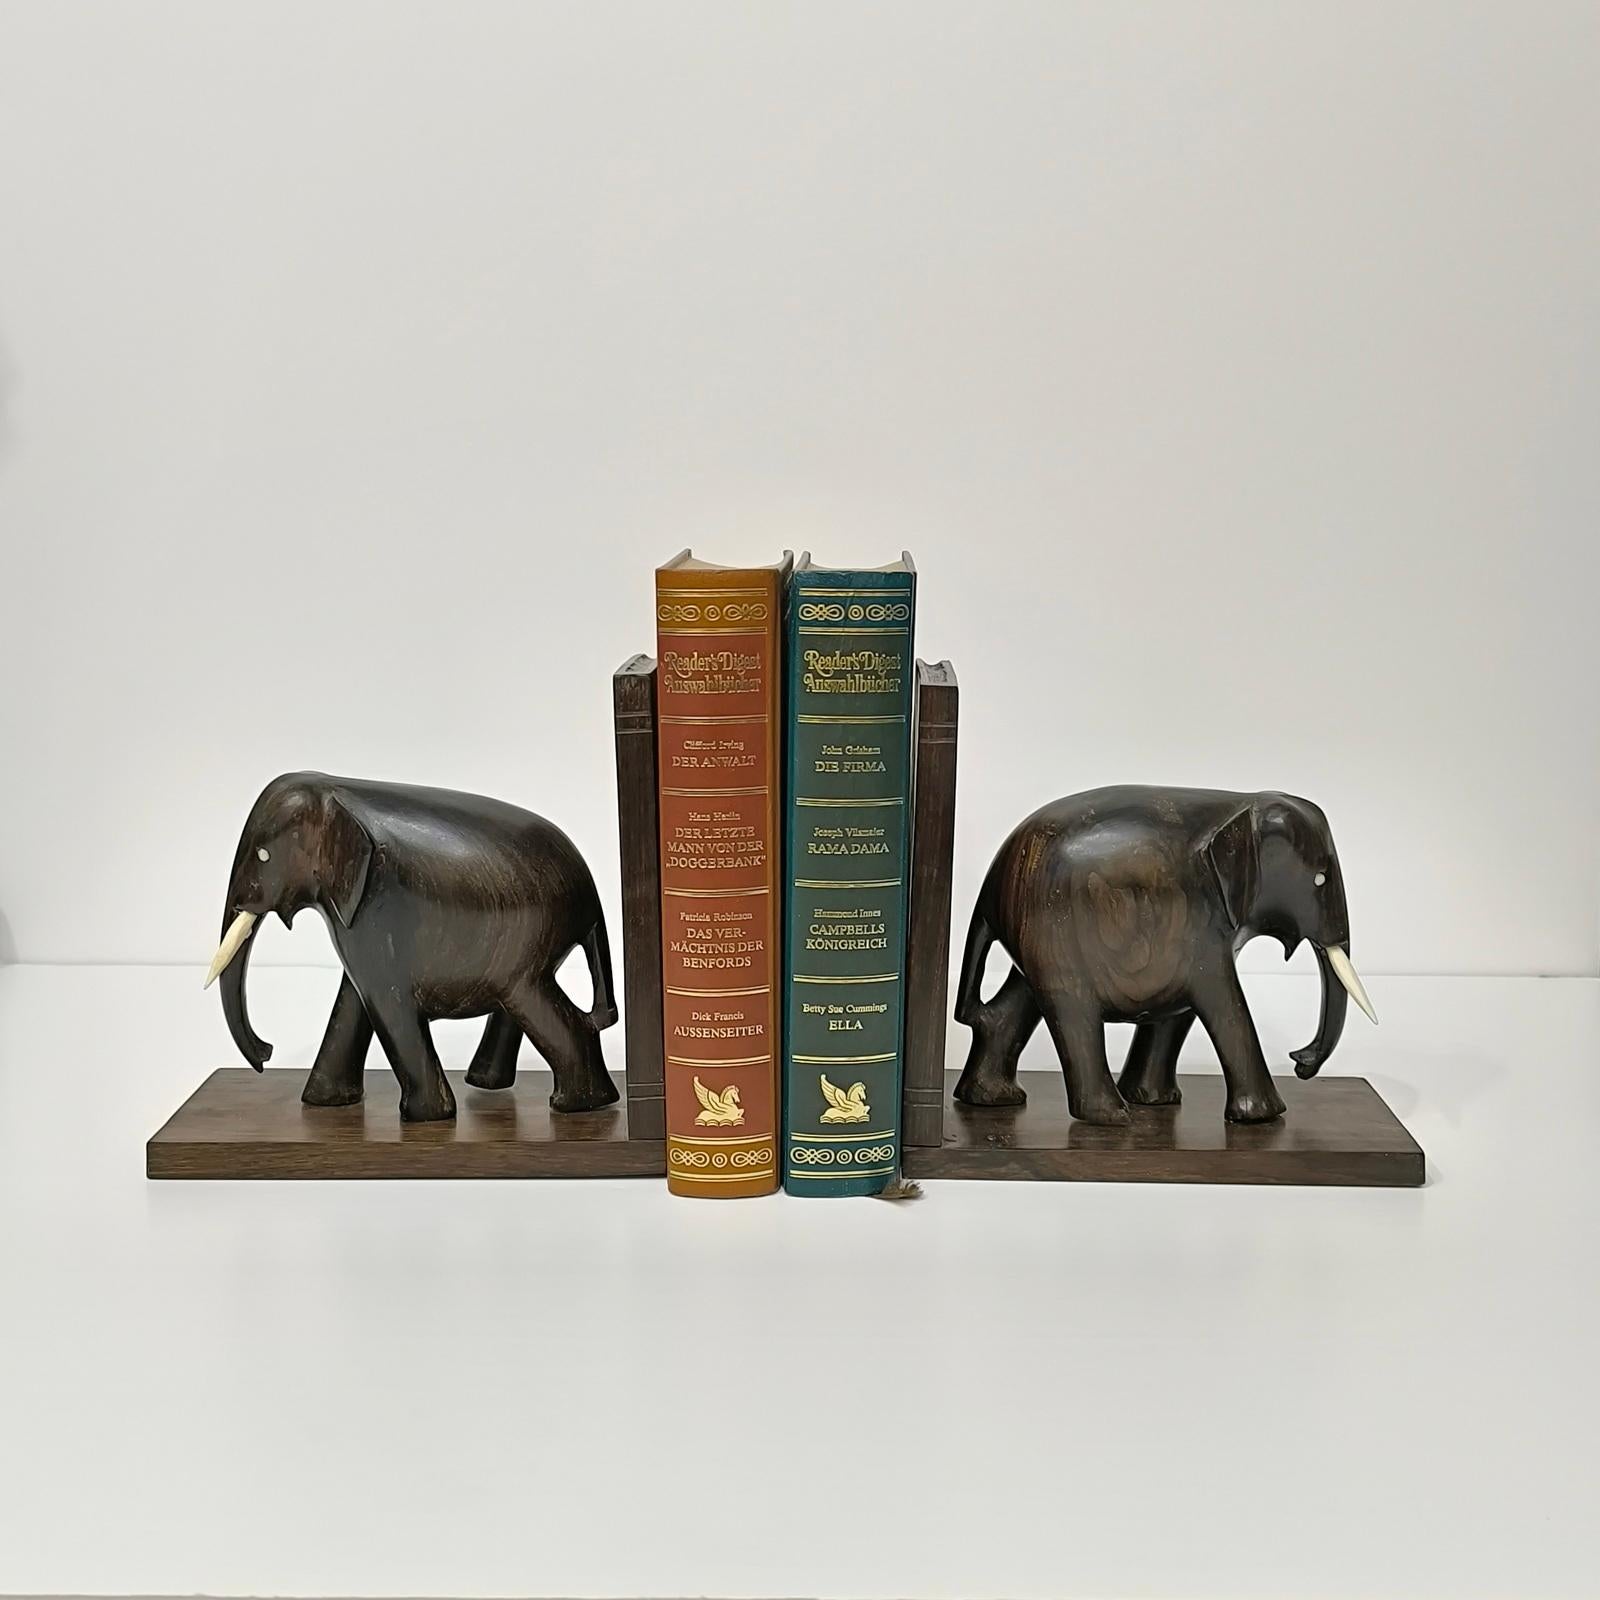 This is a pair of vintage elephant bookends. They are made of beautiful hardwood, hand-carved, and have bone-made eyes and tusks. 

They are in excellent used condition. They are delightful for the regular novel reader on a desktop or shelf.